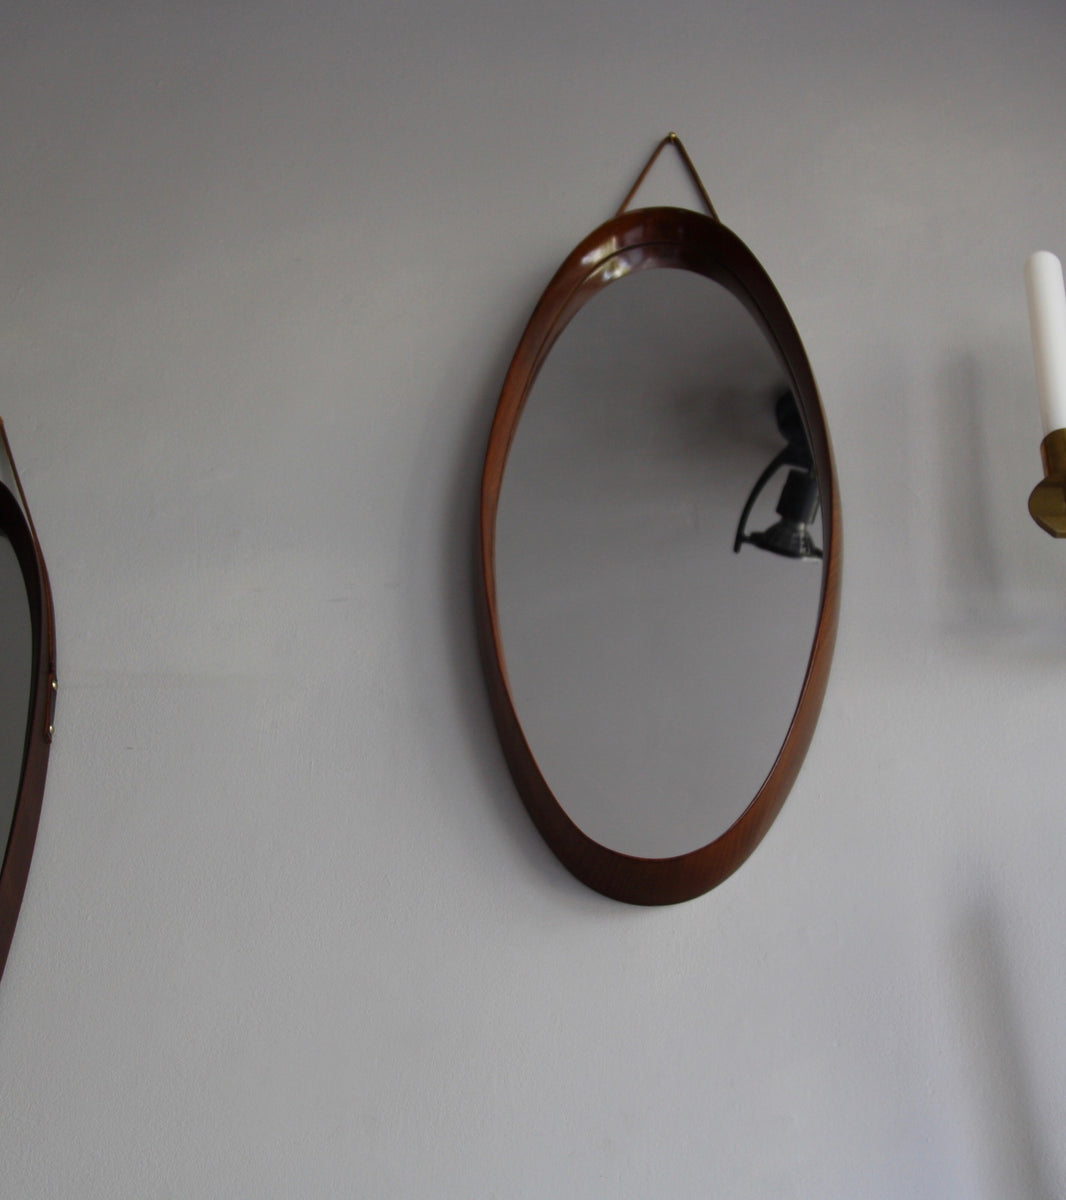 Teak Oval Mirror with Firm Leather Denmark C. 1950 - Image 8